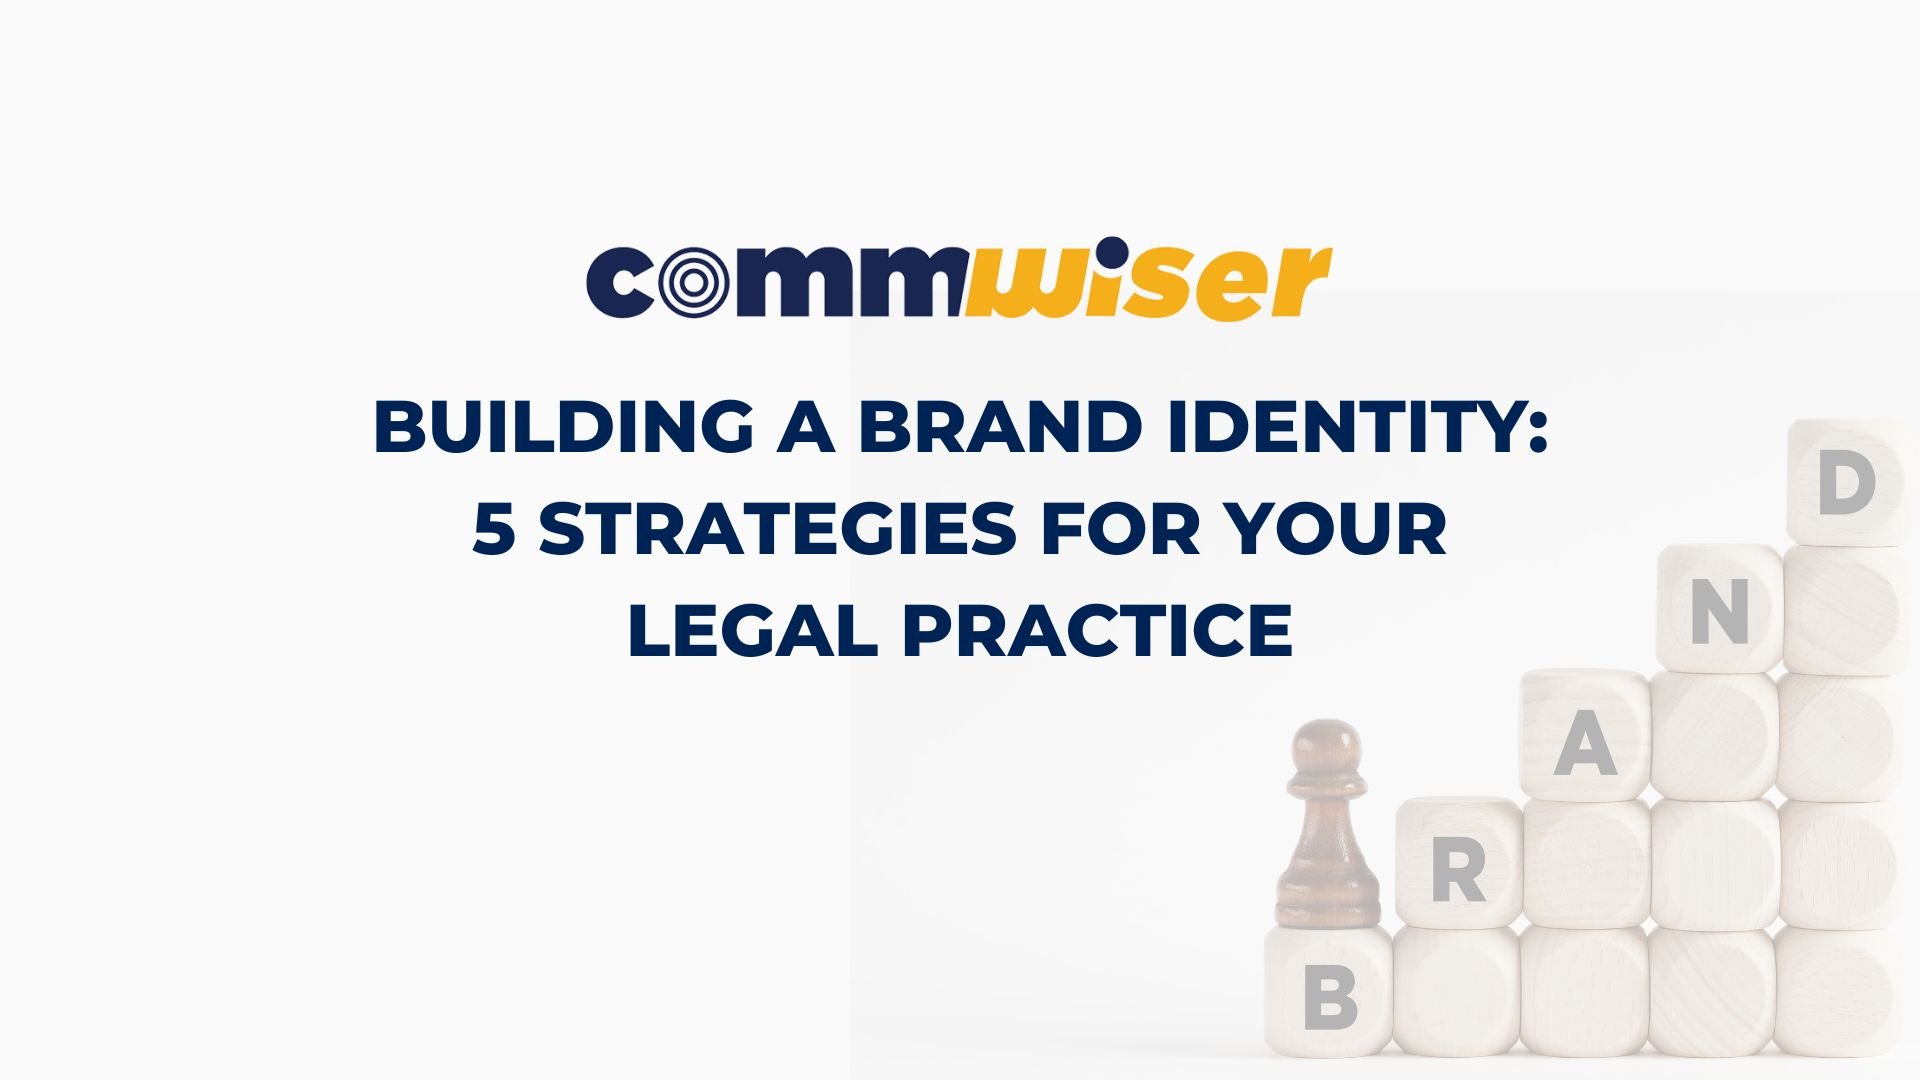 BUILDING A BRAND IDENTITY: 5 STRATEGIES FOR YOUR LEGAL PRACTICE